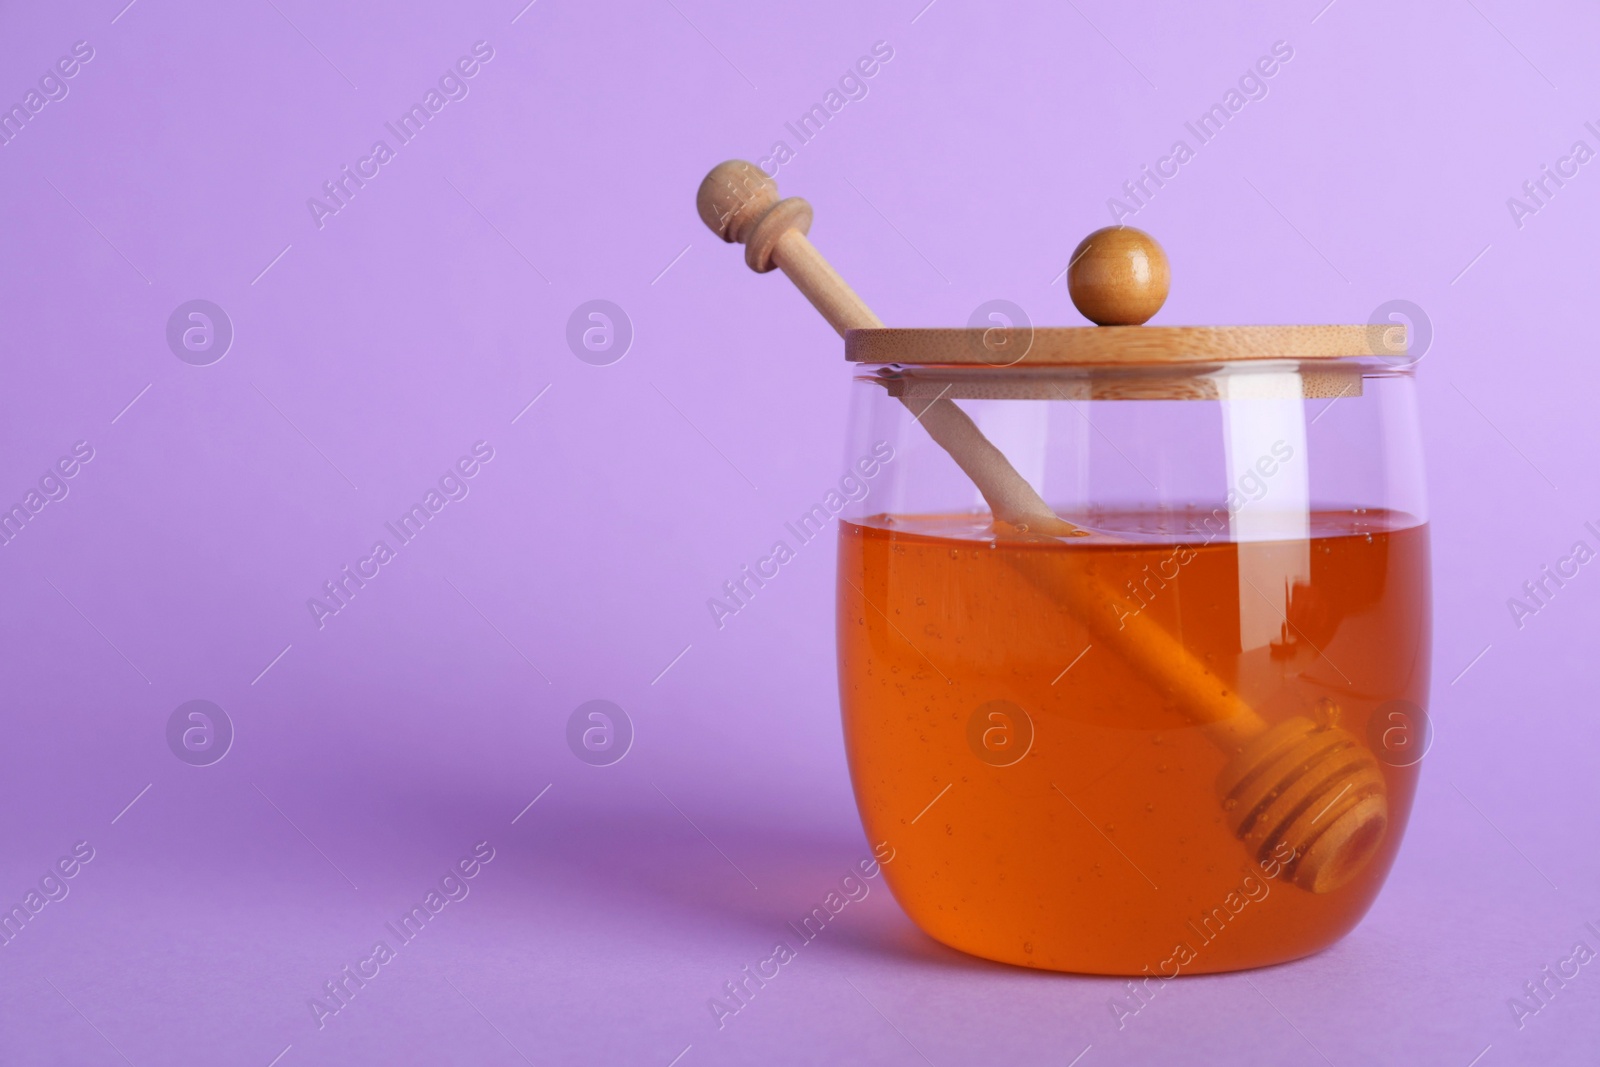 Photo of Jar of organic honey and dipper on violet background. Space for text